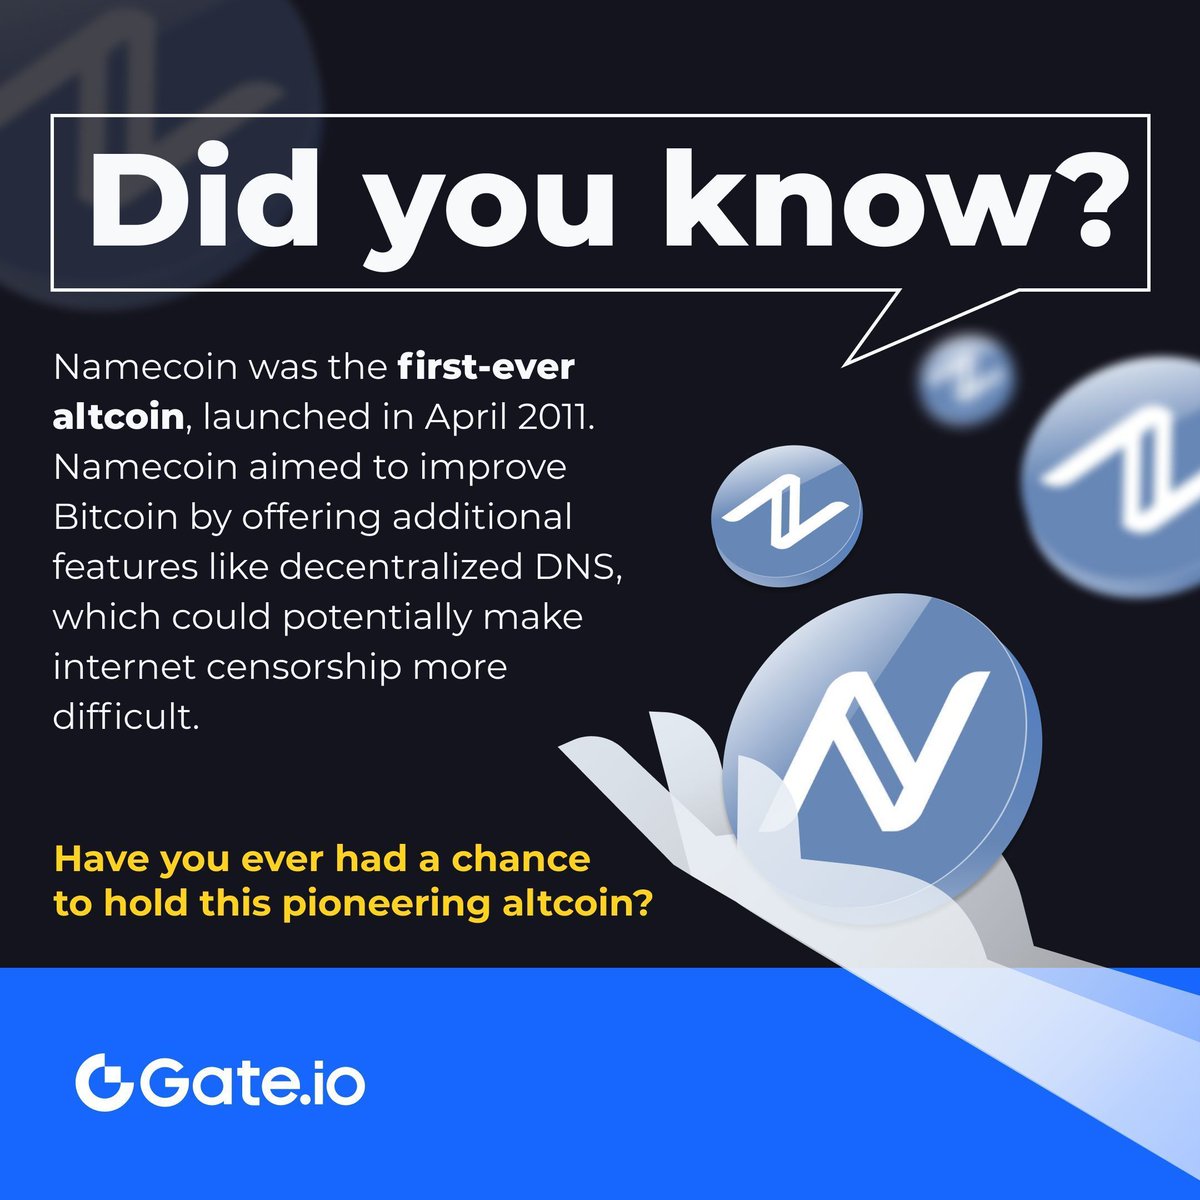 🌟 Love #altcoins?

Name the most undervalued #altcoin #gem on the market right now!

#Gateio #DidYouKnow #alts #cryptotrivia